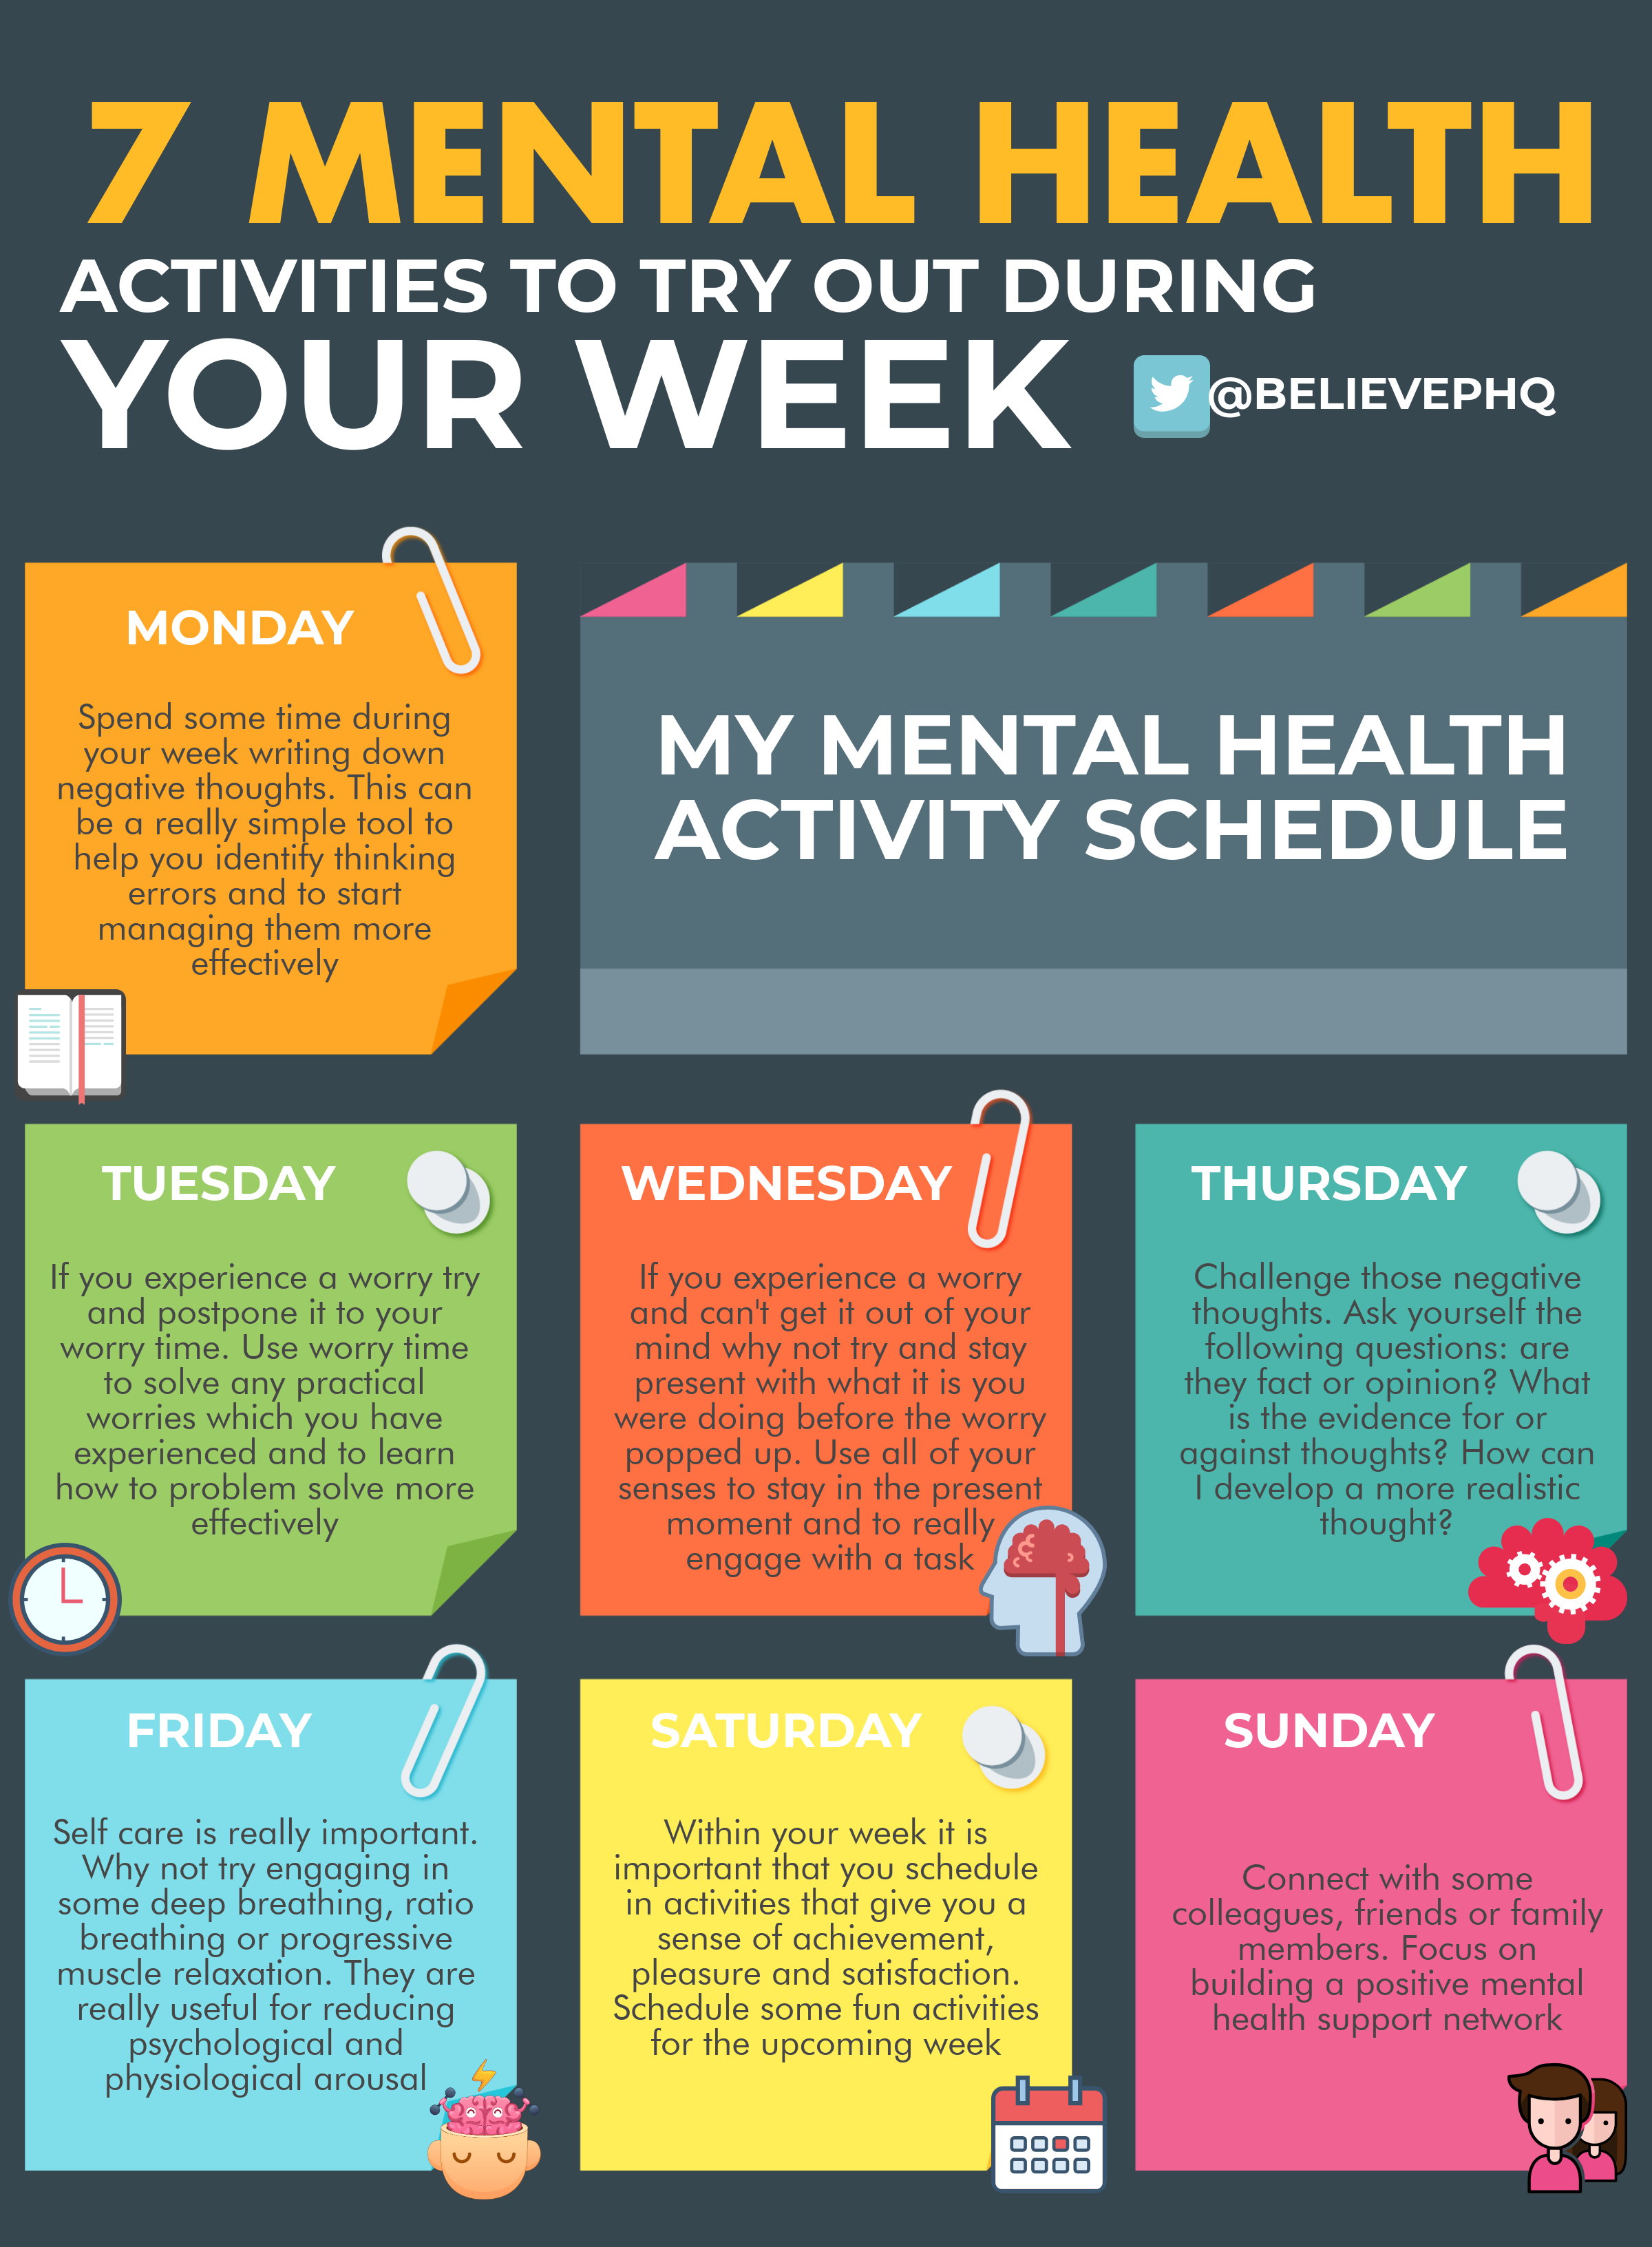 7-mental-health-activities-to-try-out-during-the-week